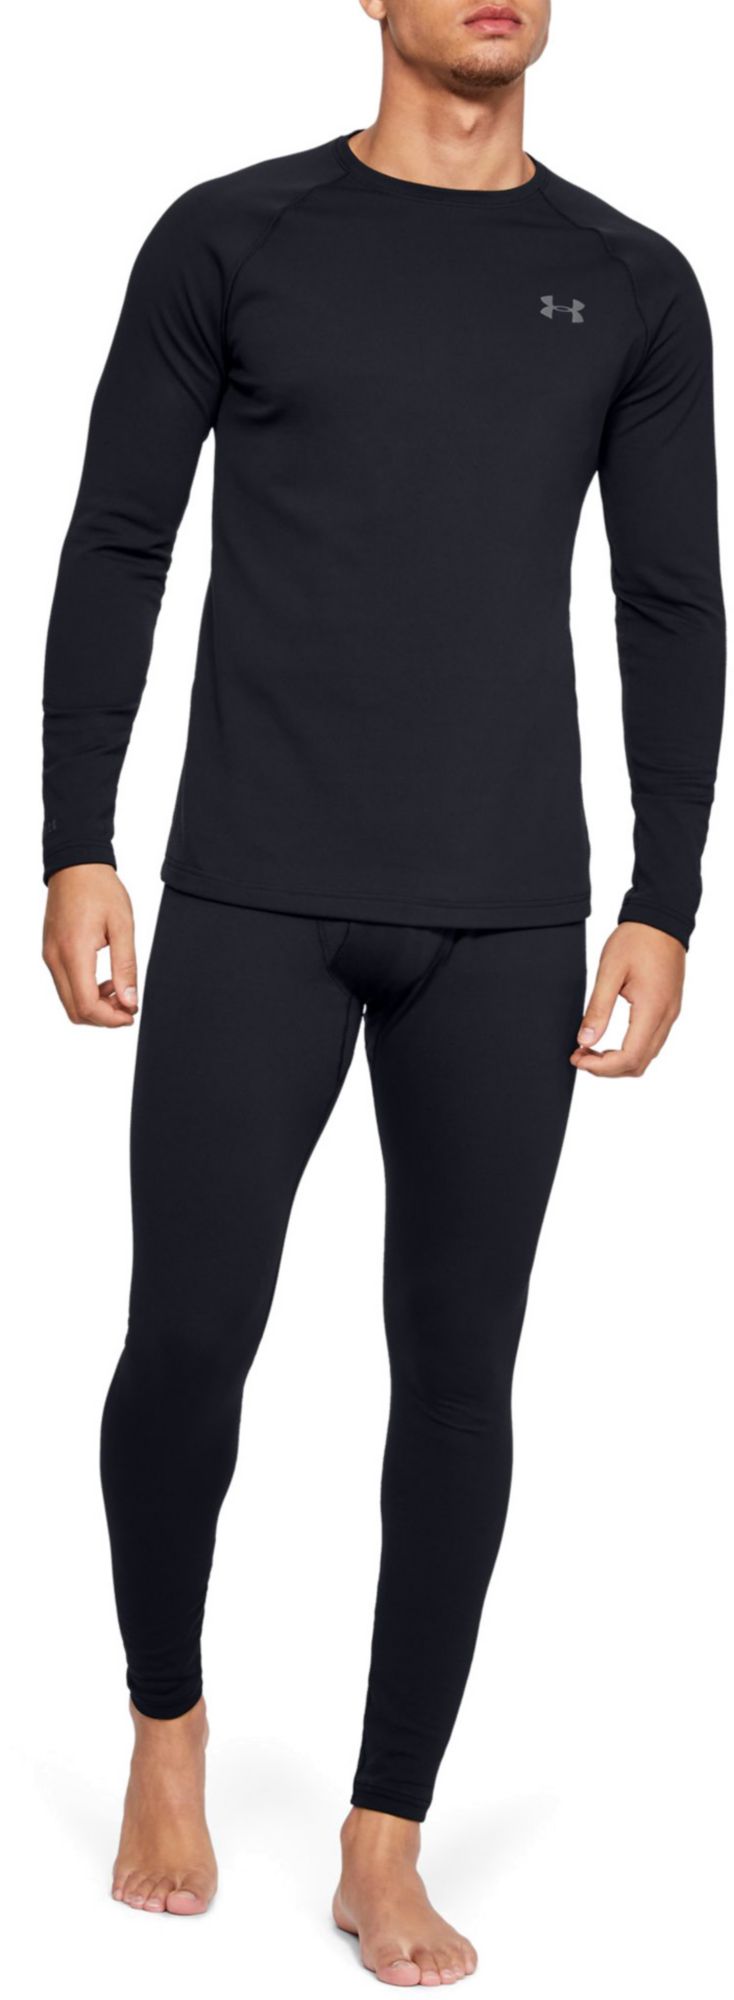 under armour base layer 2.0